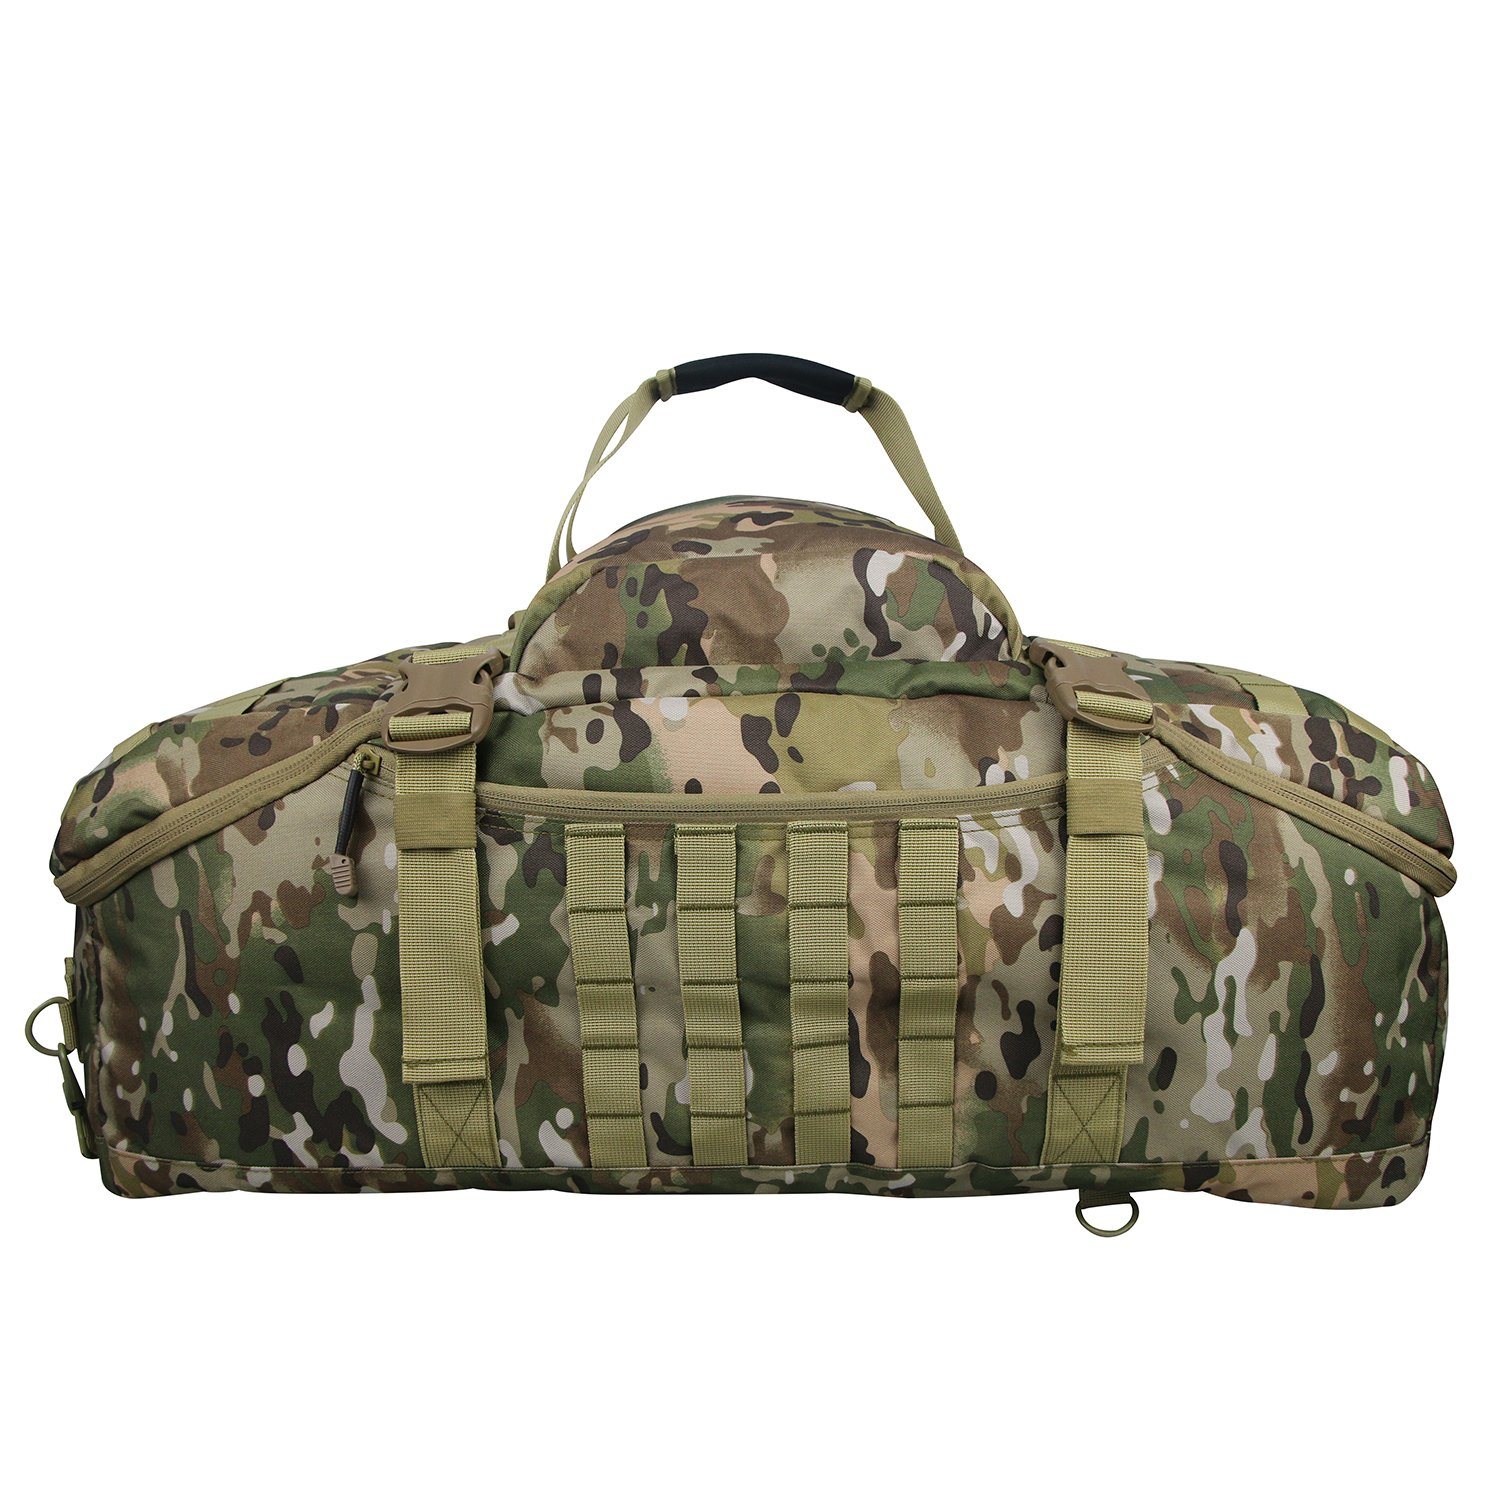 Small Size Waterproof Duffel Adventure Backpack Straps Military Tactical Travel Duffel Bag